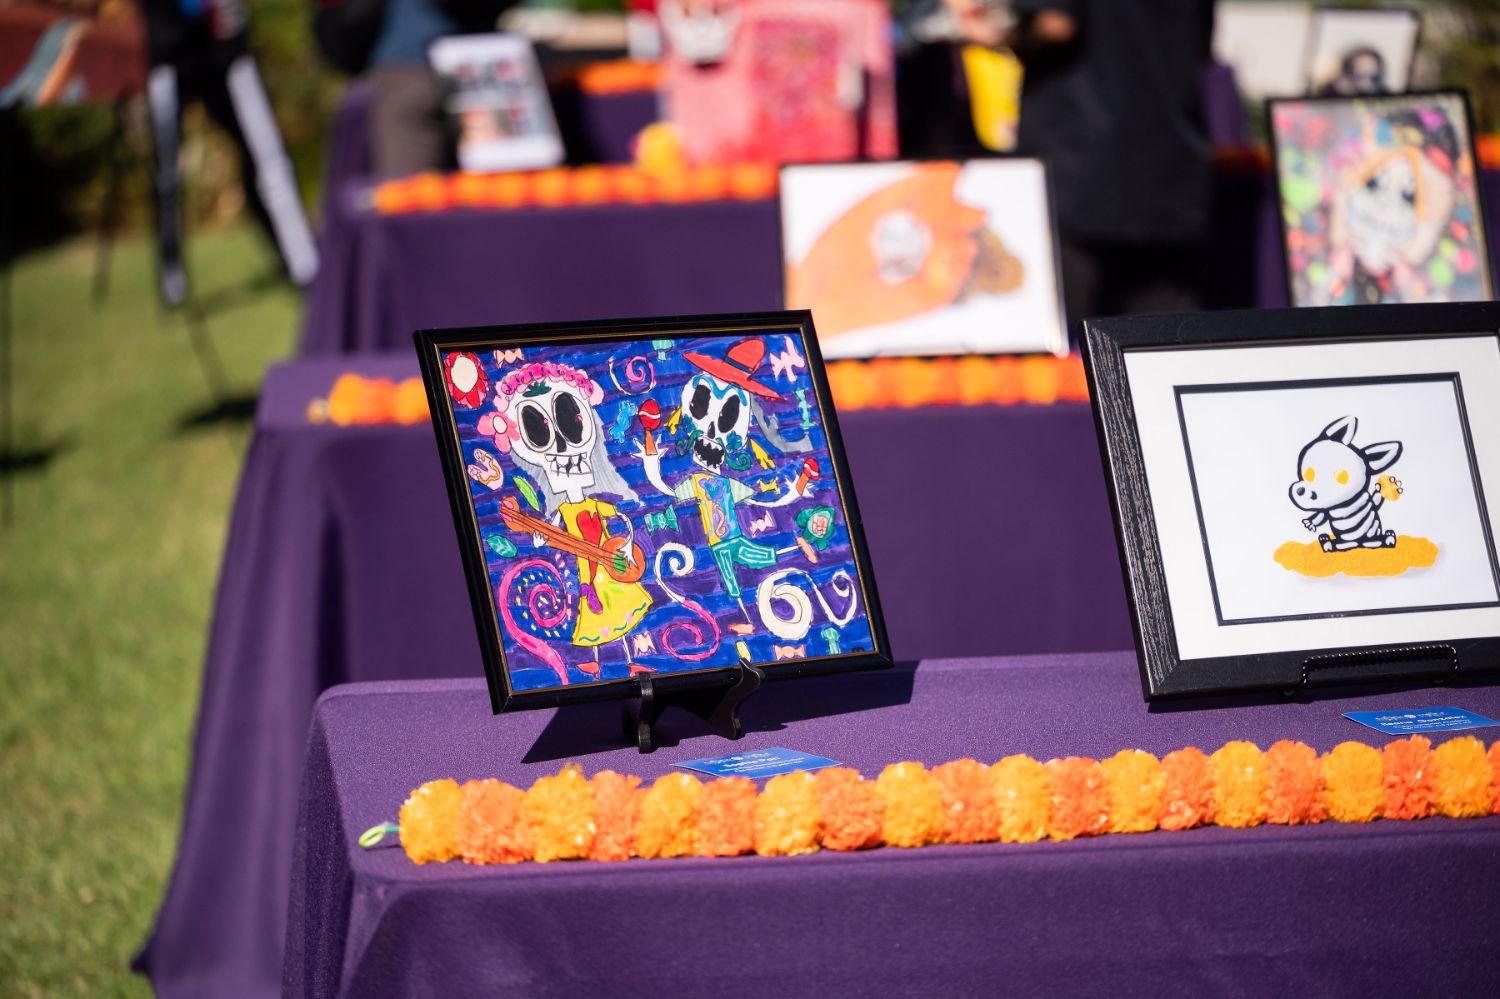 PHOTO: provided by Pasadena Tournament of Roses | The South Pasadenan | 2022 entries for the Tournament of Roses Dia de los Muertos art competition.